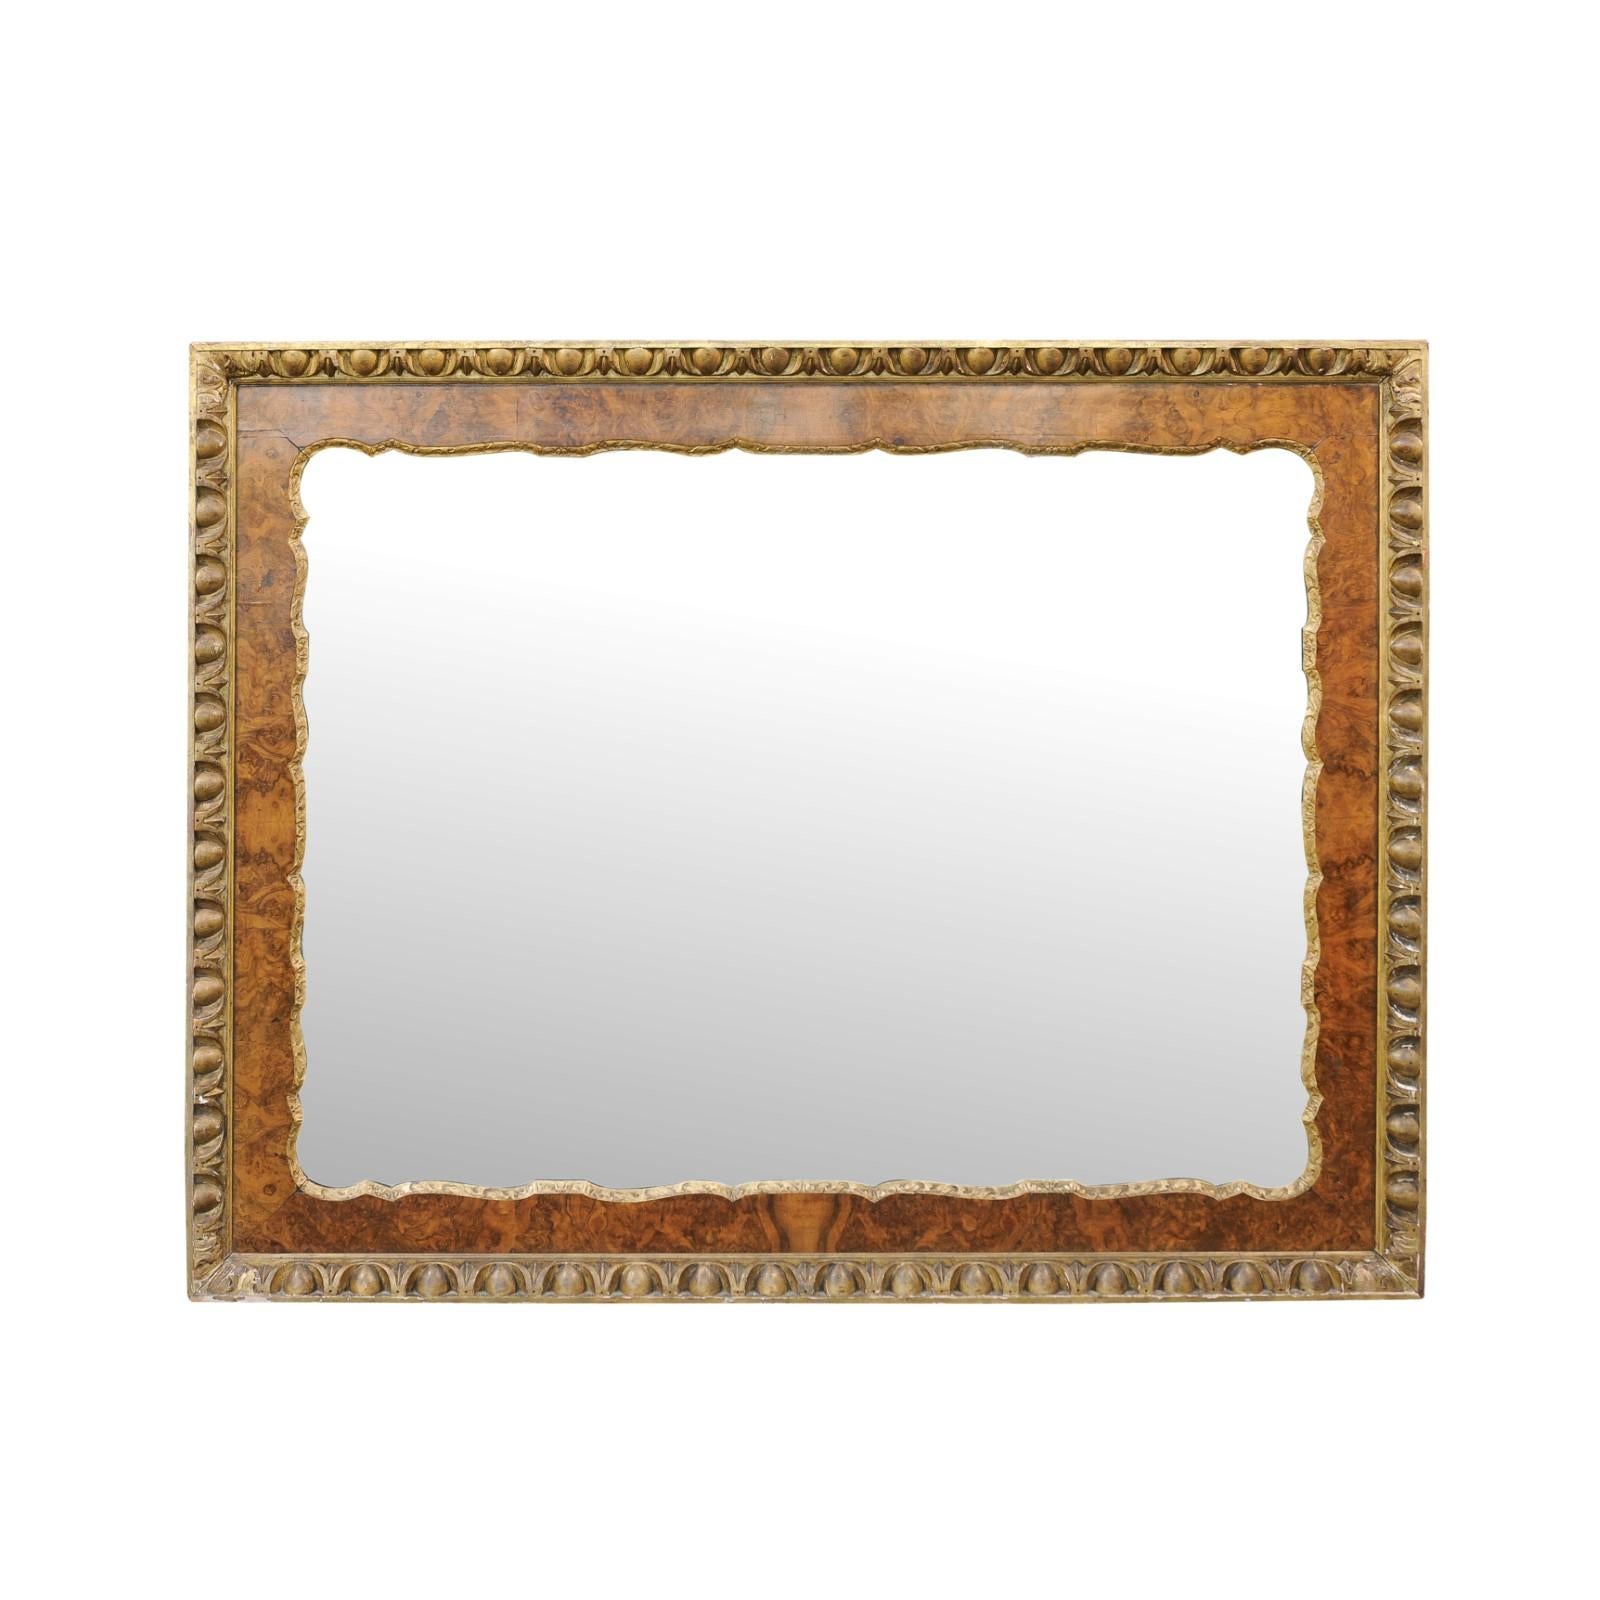 A large English burl wood mirror from the late 19th century, with gilt accents and egg and dart motifs. Born in England during the third quarter of the 19th century, this large mirror will look wonderful displayed vertically or horizontally.